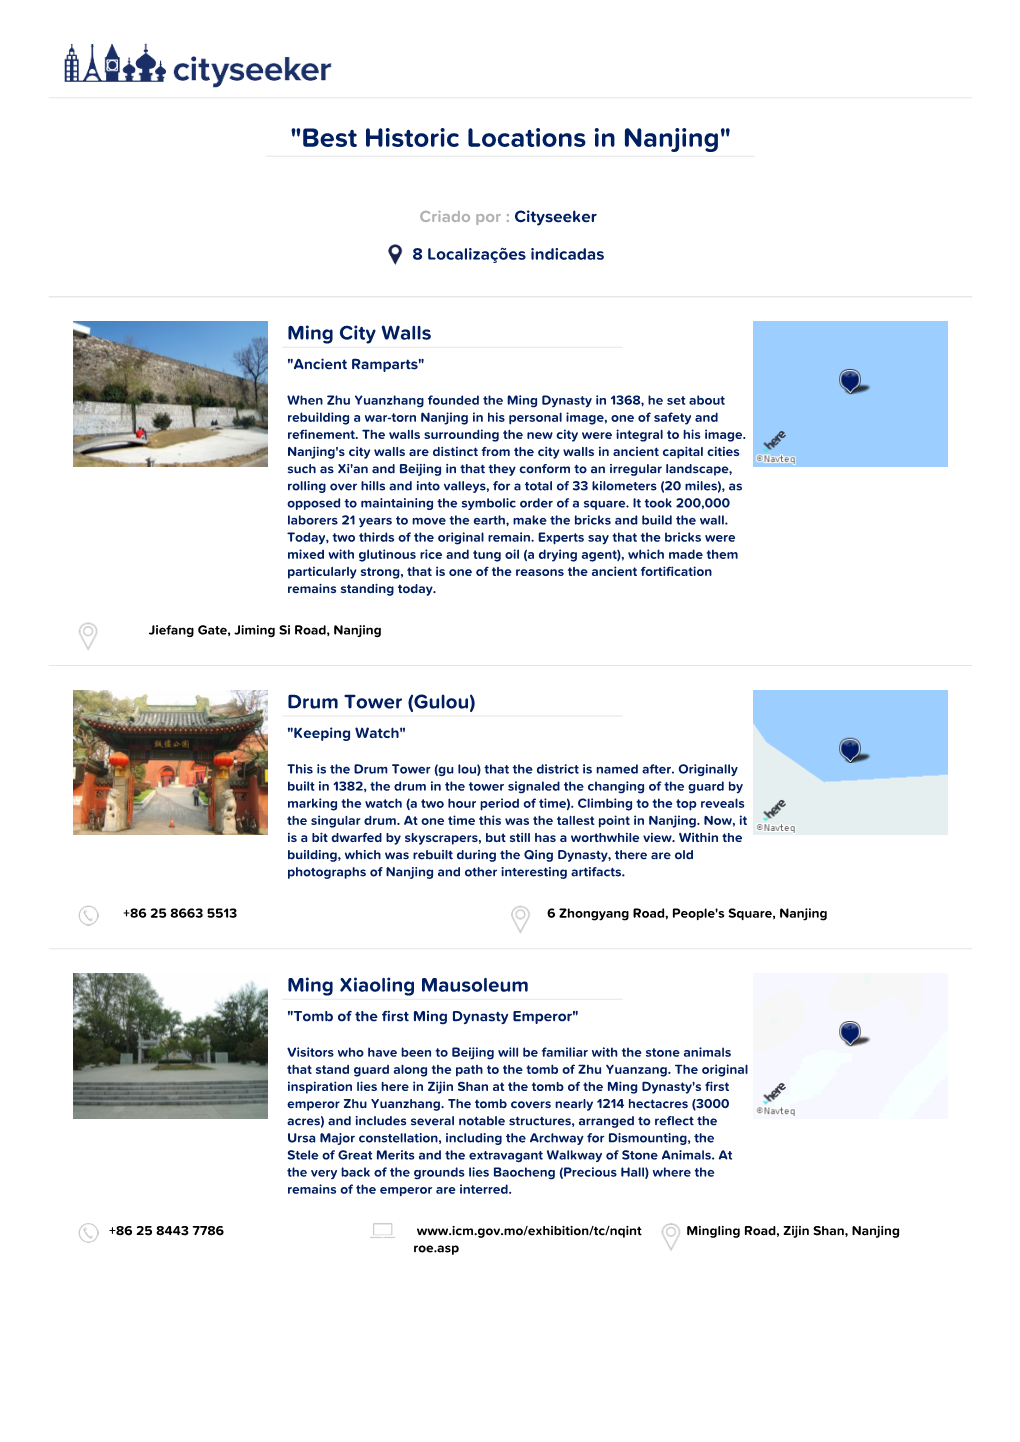 Best Historic Locations in Nanjing"